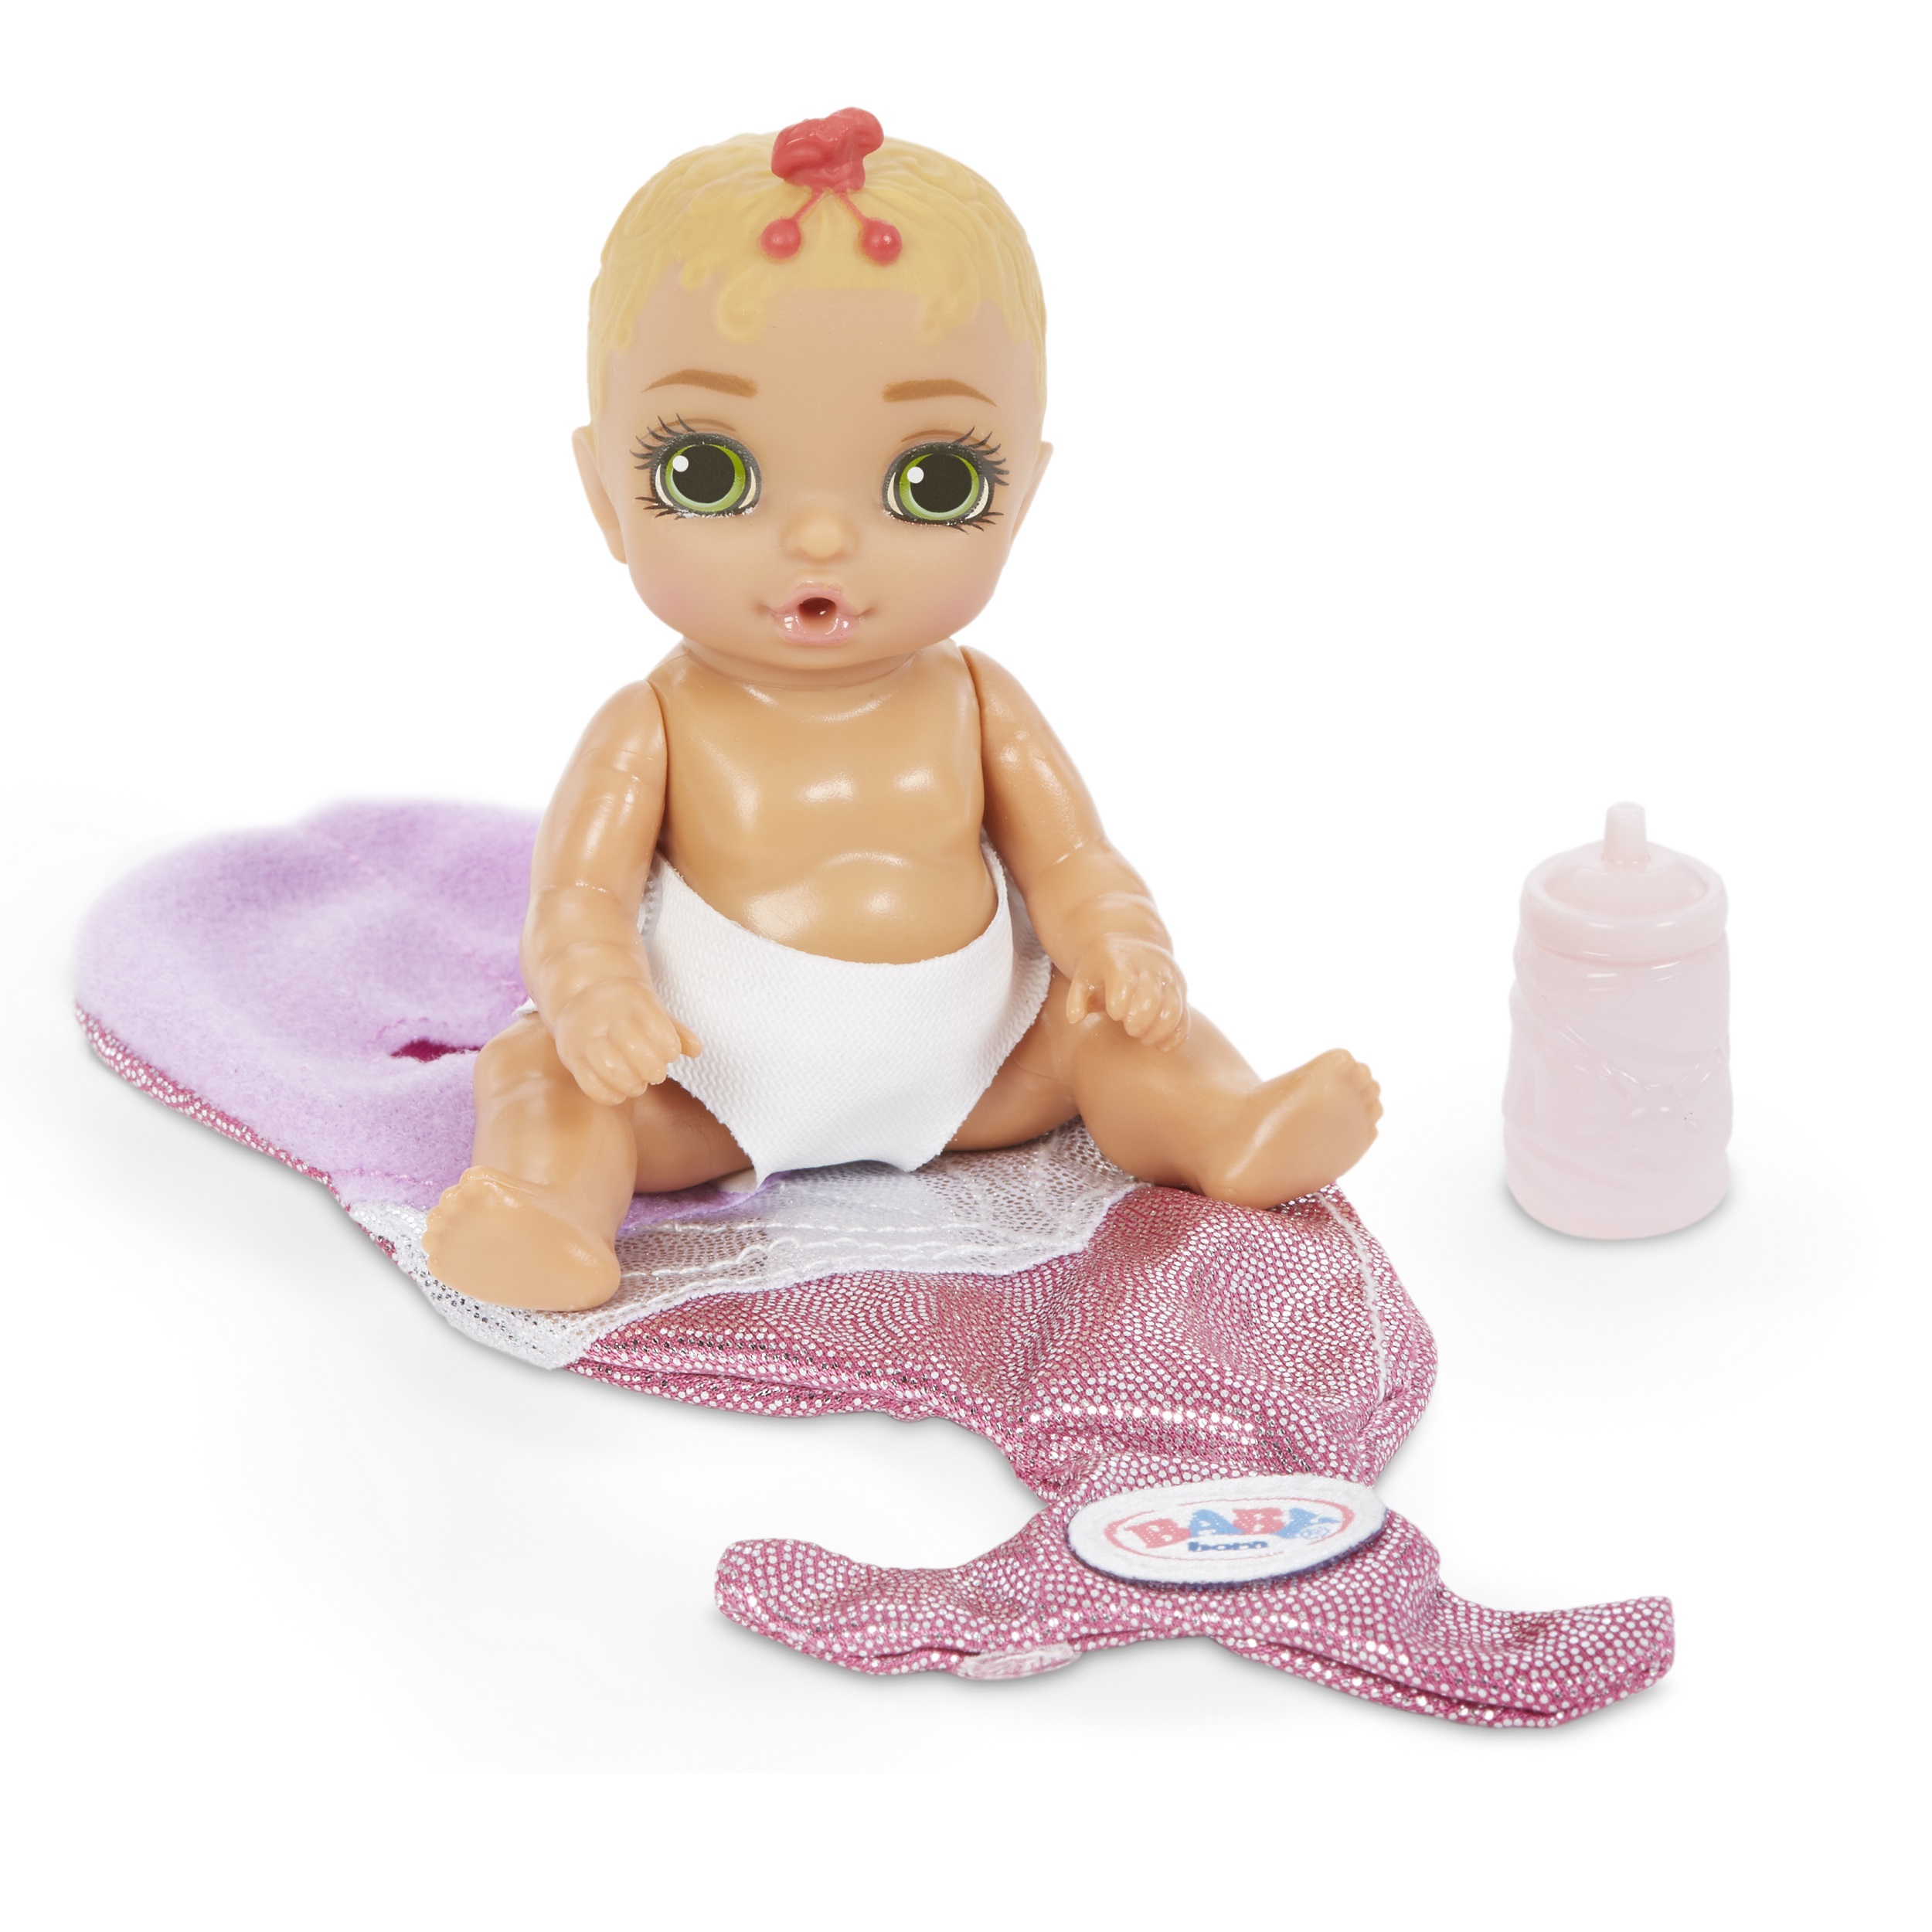 Baby Born Surprise Series 2-1 Collectible Babies with Color Change - image 2 of 6